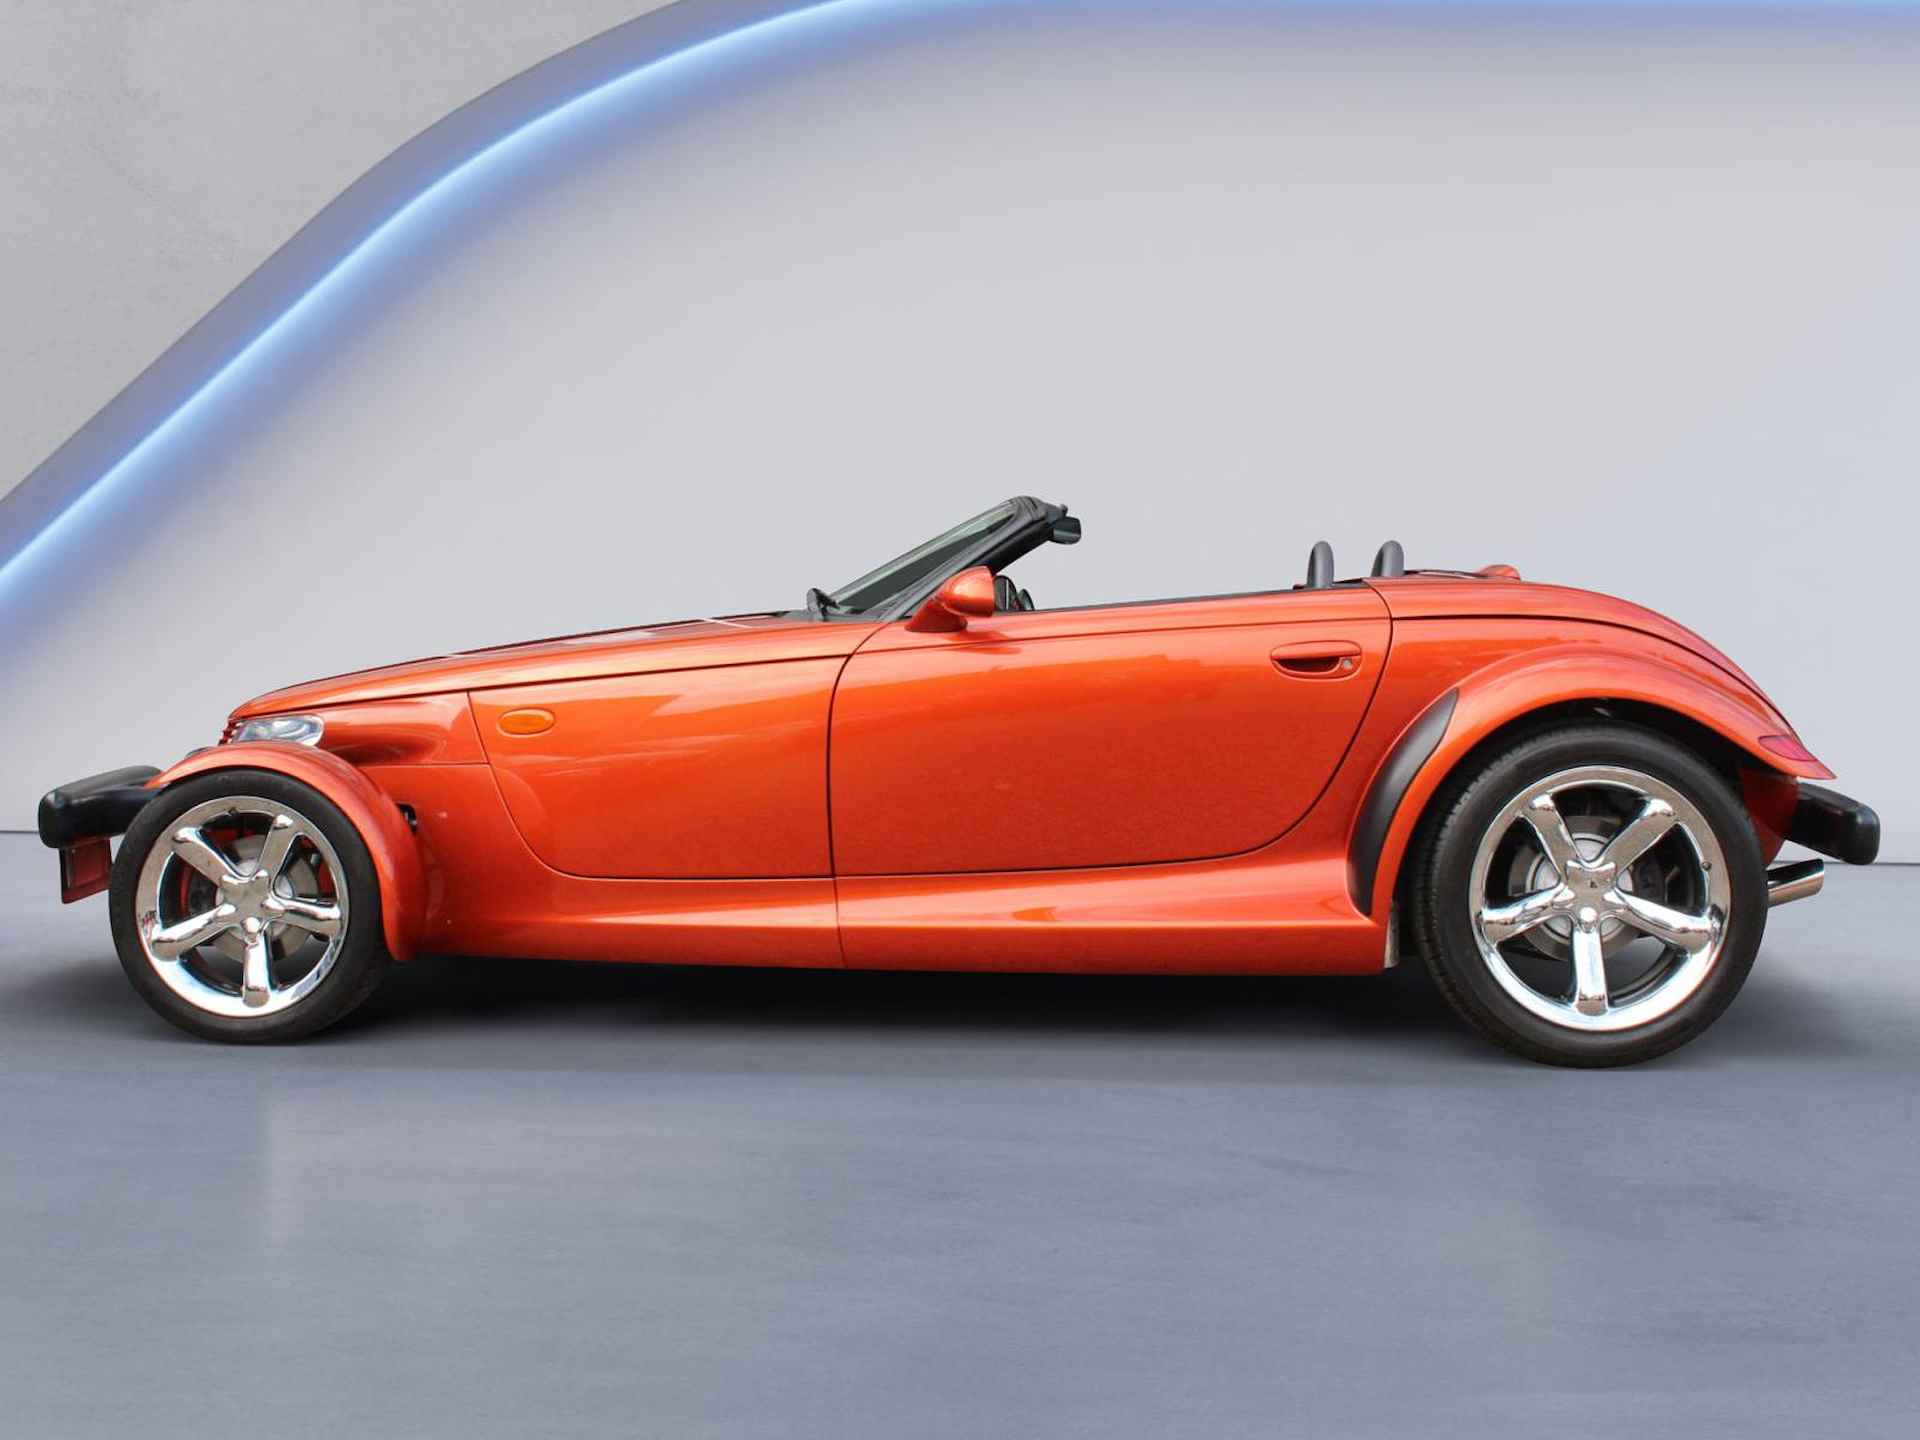 Plymouth Prowler Automaat 3.5i-V6 Youngtimer Nieuwe Cabriokap, Wind scherm Auto is in Concoursstaat. - 2/17